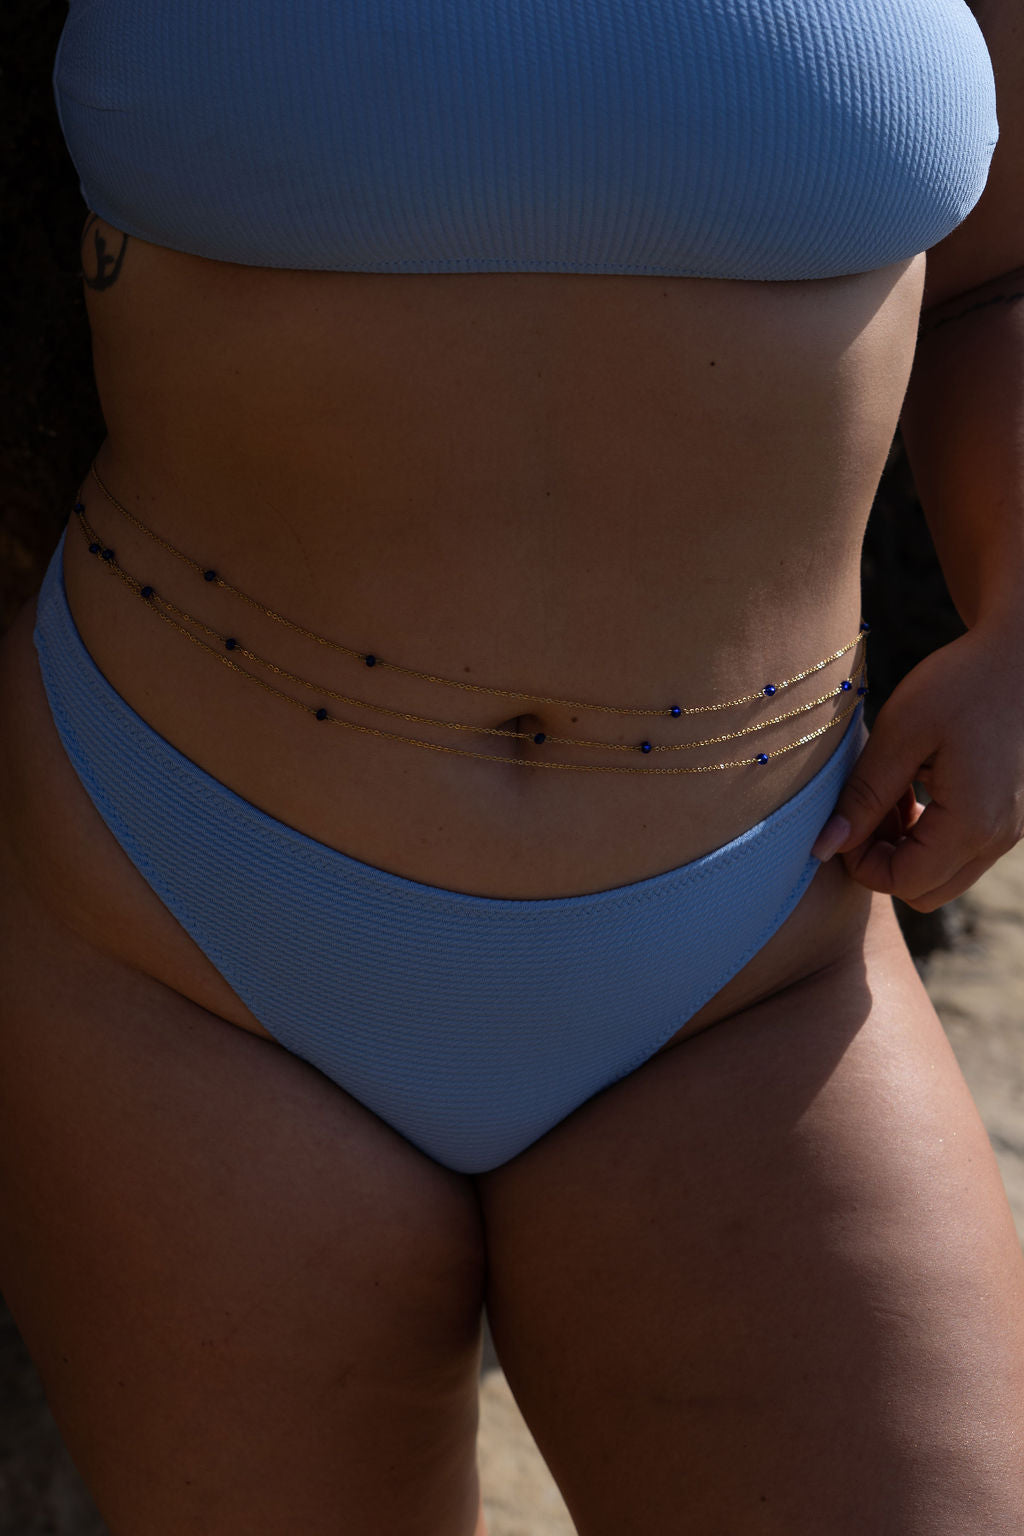 Tania's Timeless Body Chain